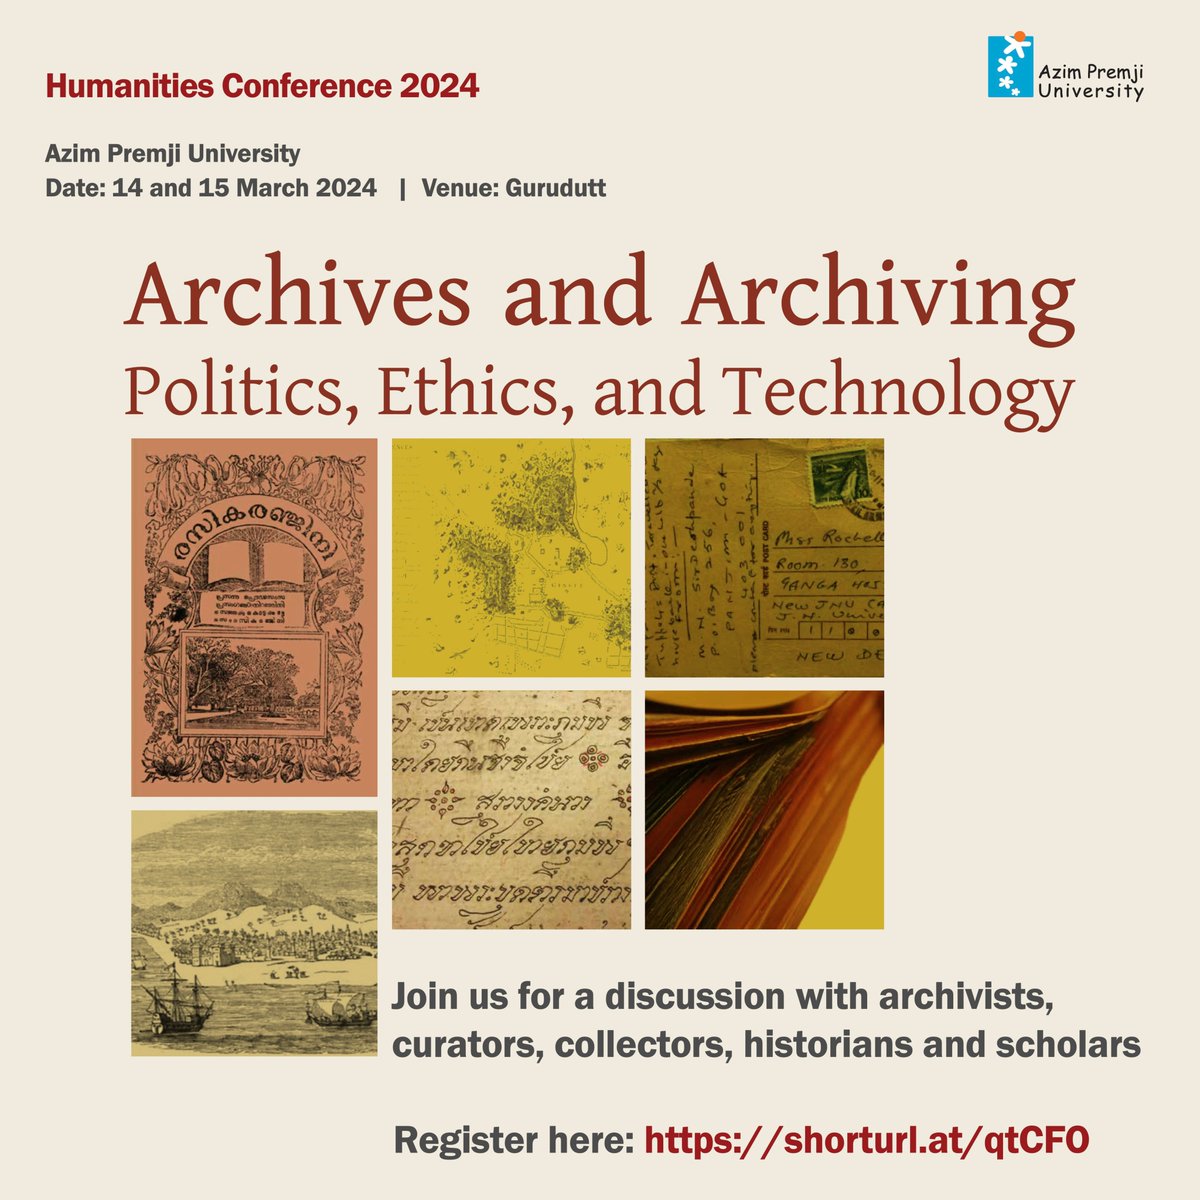 Are you intrigued by archives & archivists? 
Join @AzimPremjiUniversity Humanities Conference on Archives & Archiving! ️ March 14-15th. Explore ethics, tech, & the future of archives. 
#History #PublicAccess